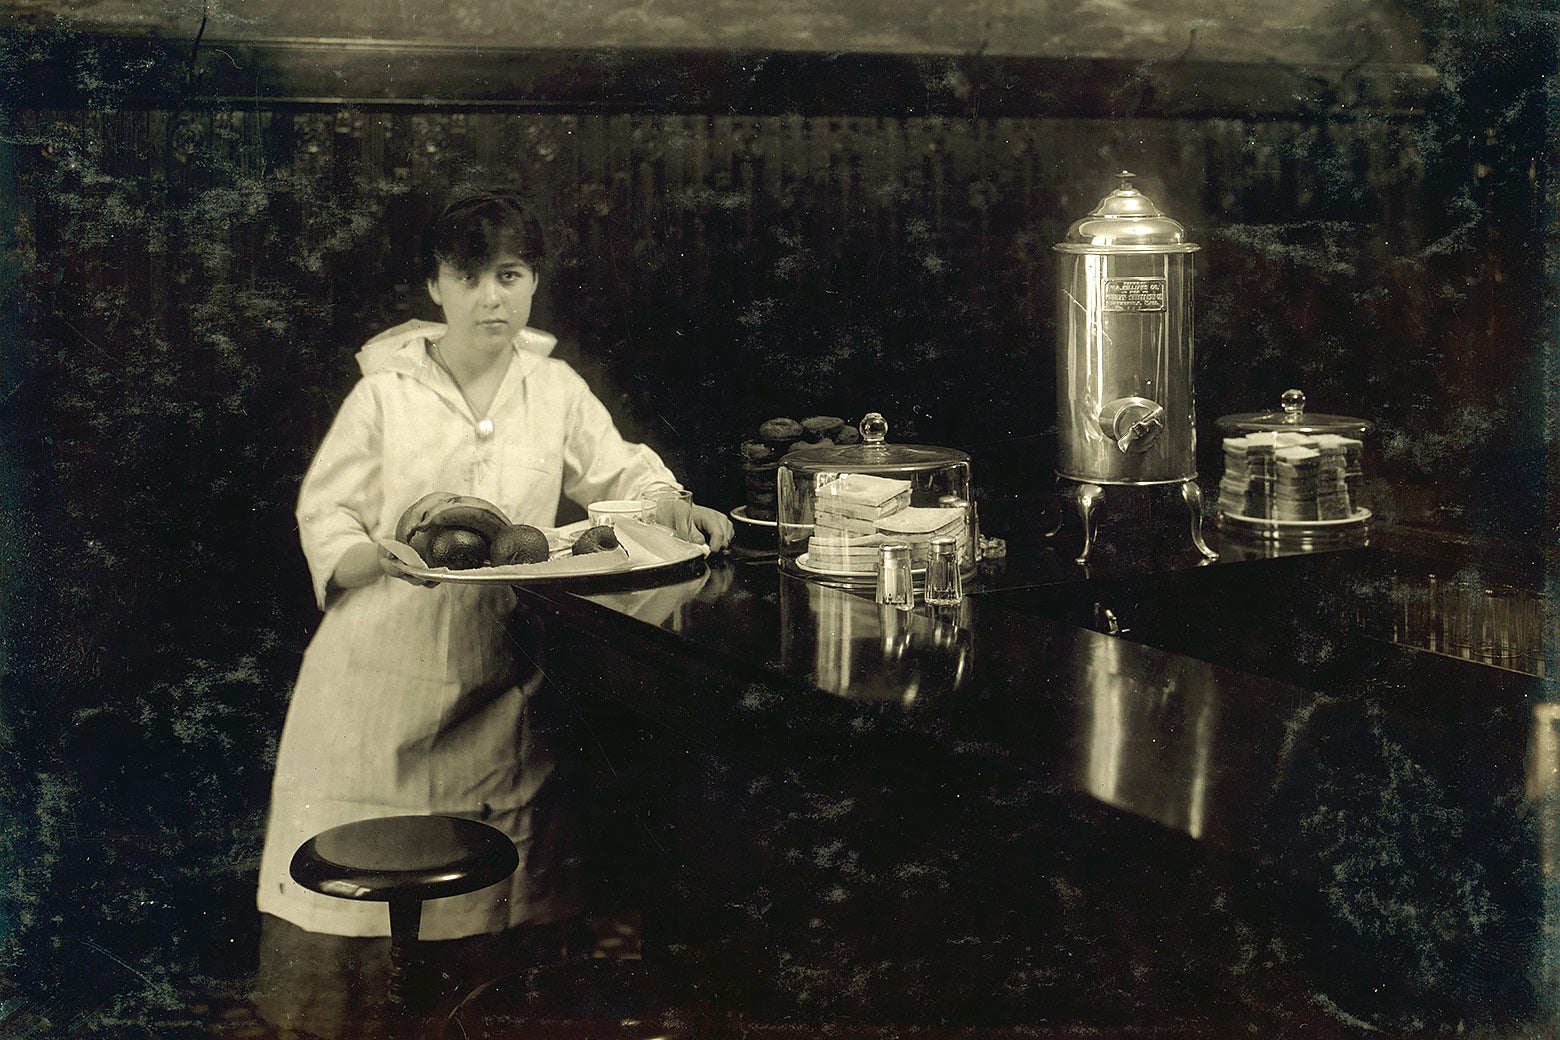 A young waitress wearing an apron and holding a tray leans on a restaurant counter next to cakes and a silver coffee pot.